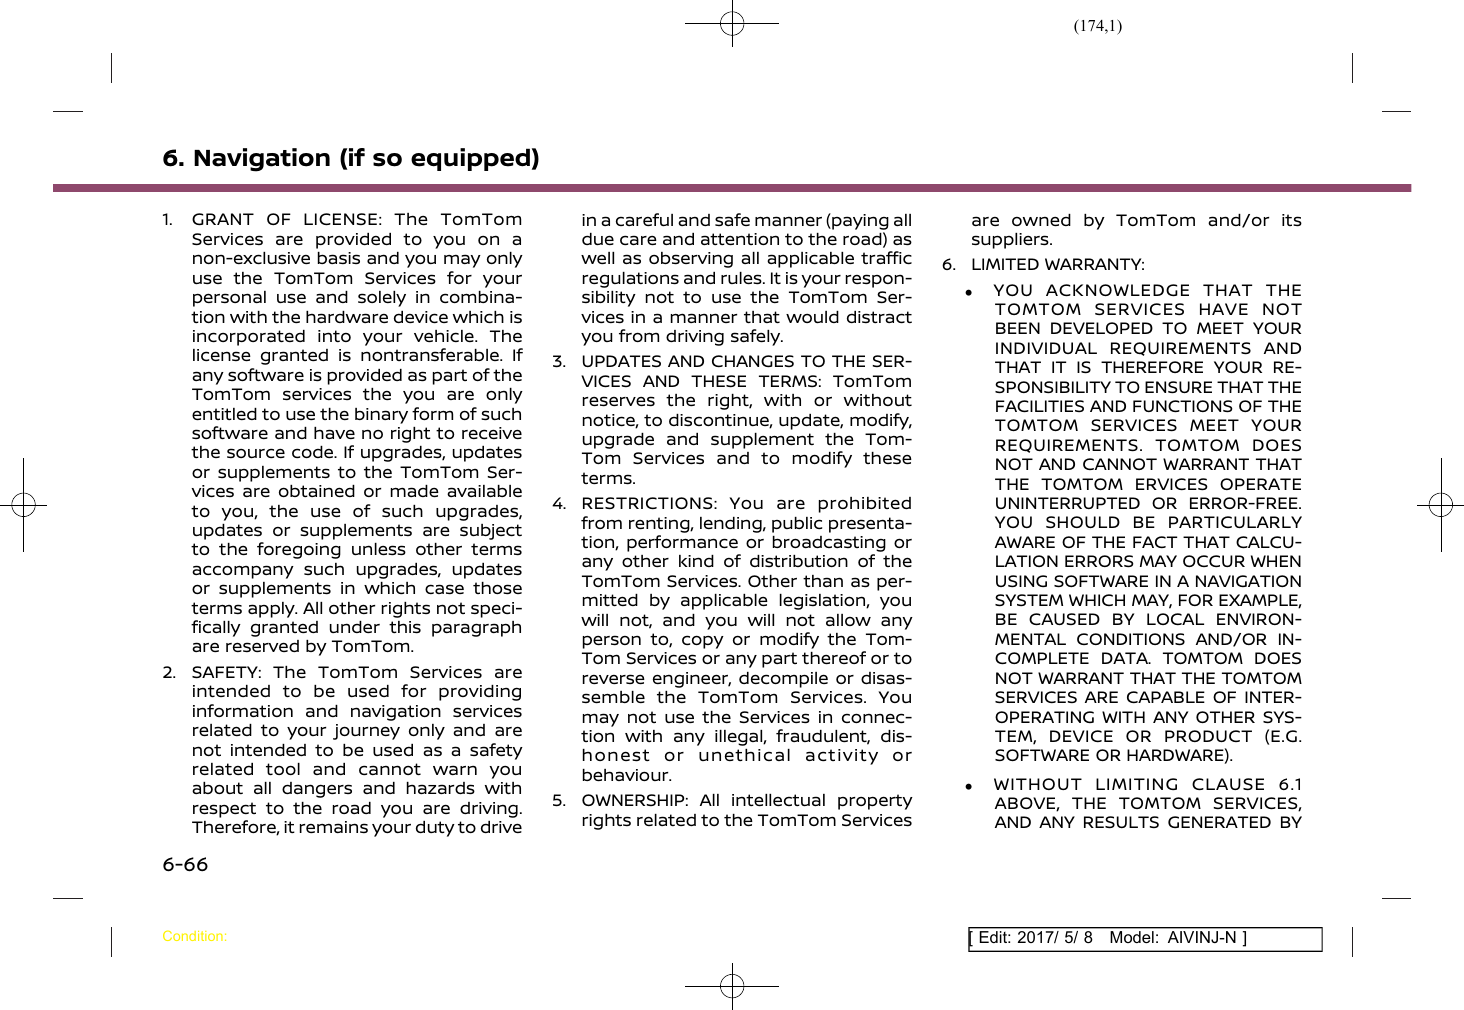 Page 174 of Robert Bosch Car Multimedia AIVICMFB0 Navigation System with Bluetooth and WLAN User Manual